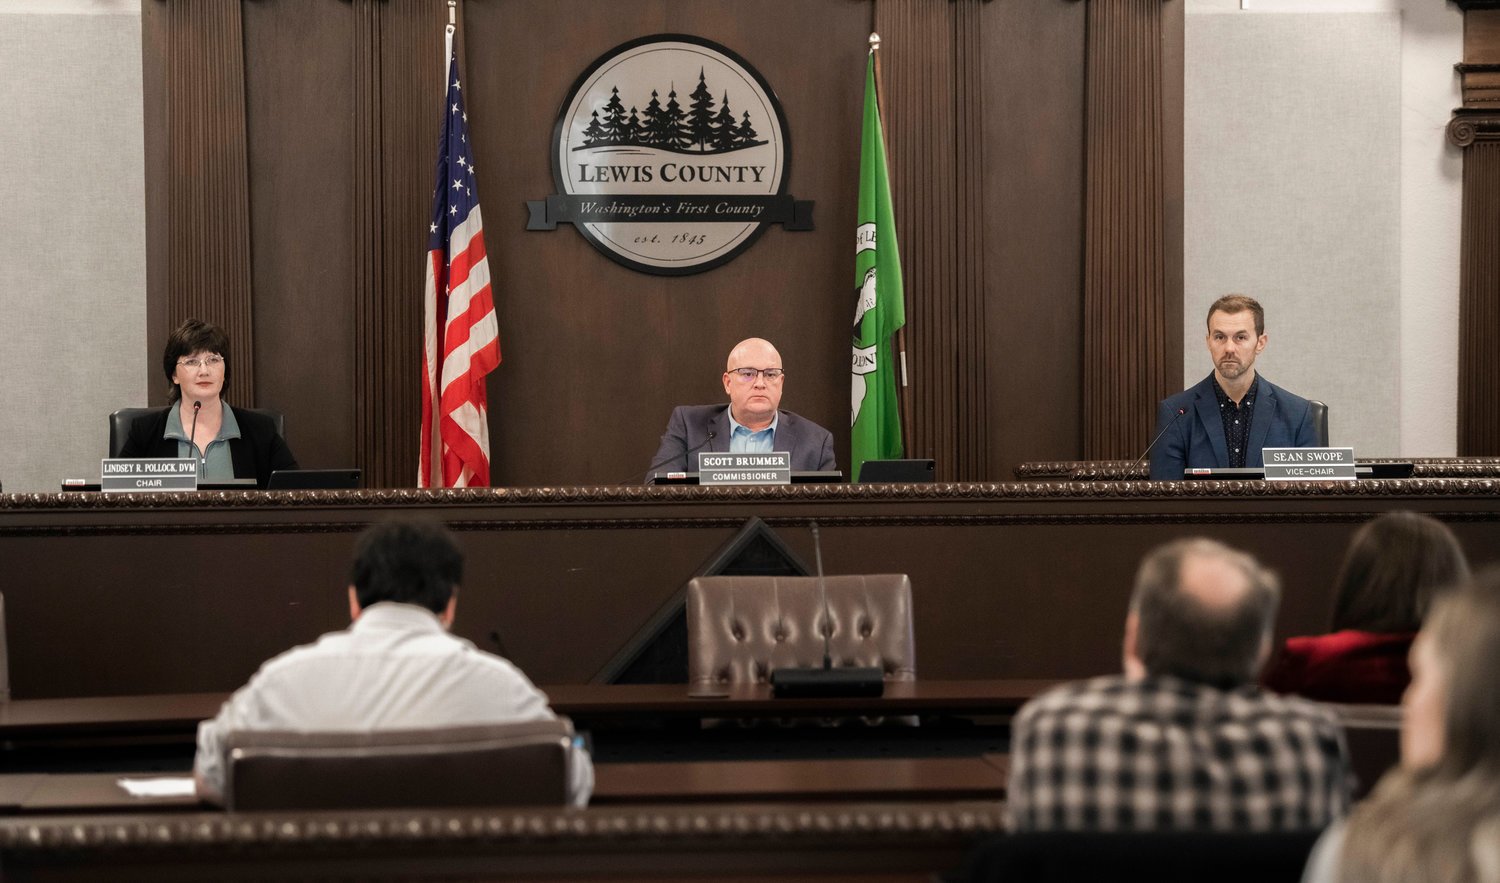 FILE PHOTO — Lewis County Commissioners Lindsey Pollock, Scott Brummer and Sean Swope prepare to pass resolutions during a November 2022 meeting.